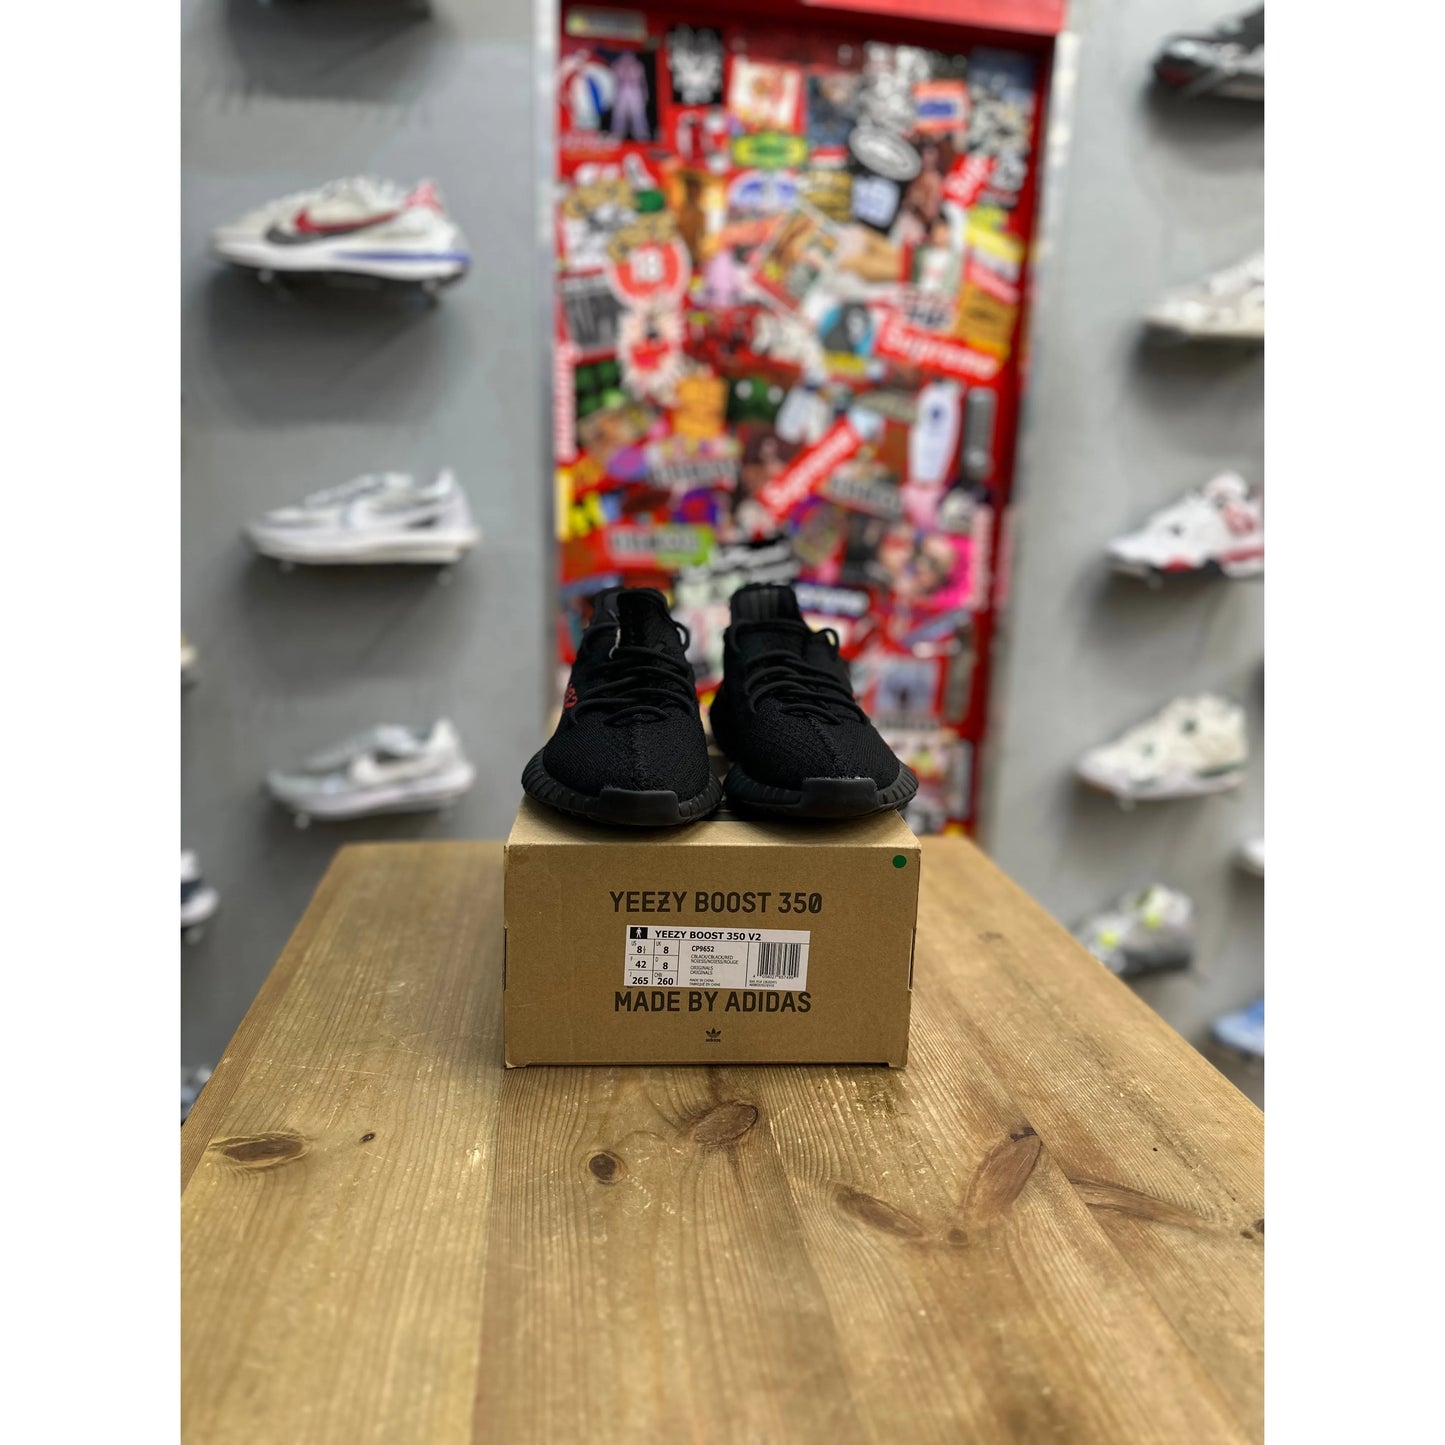 Adidas Yeezy Boost 350 V2 Black Red UK 8 by Yeezy from £265.00